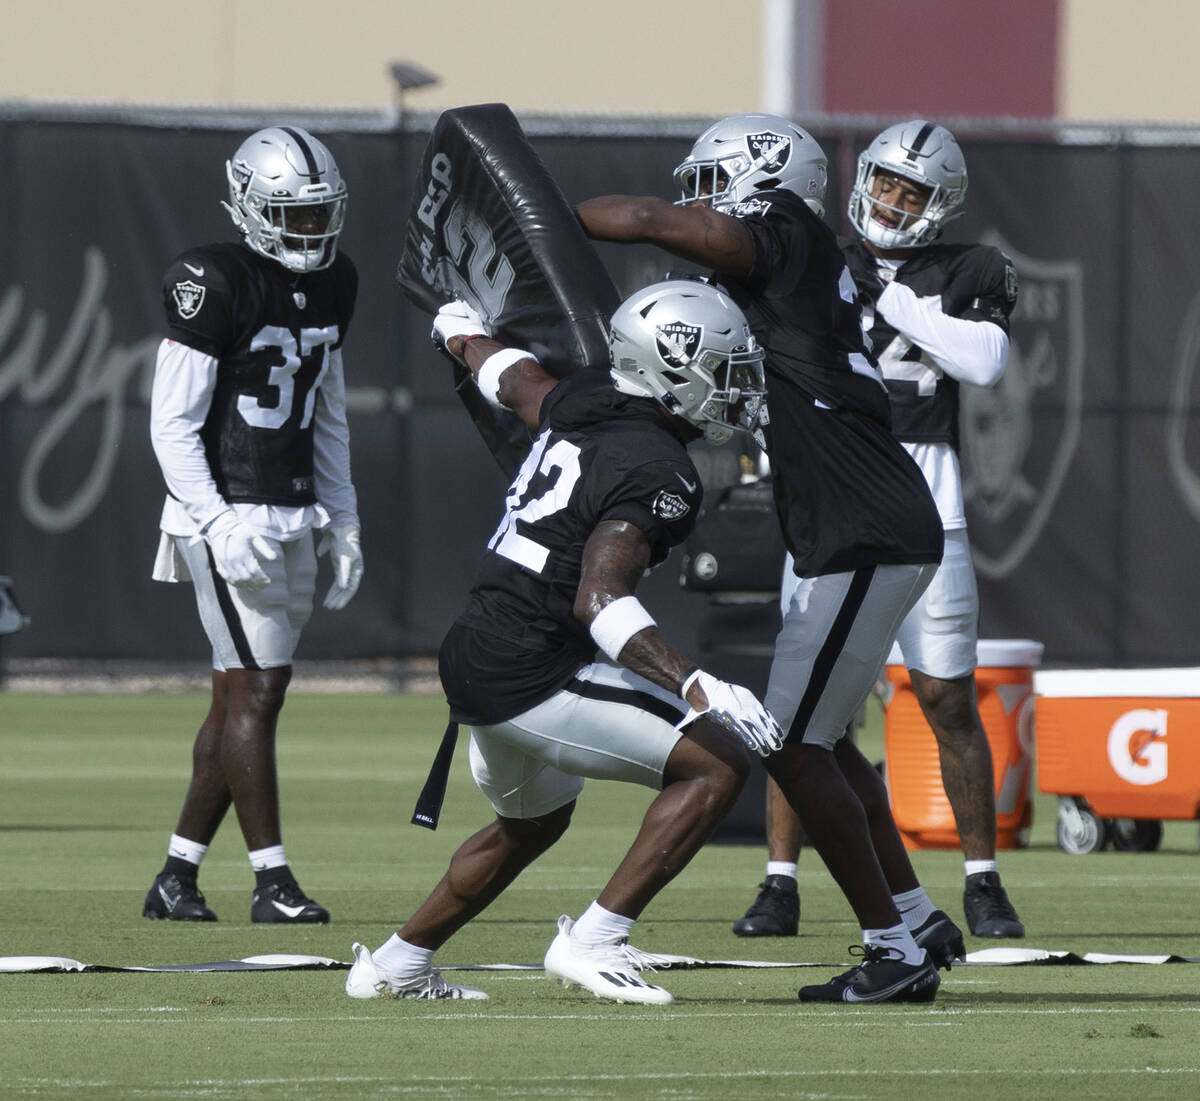 Raiders safeties, from left, Tyree Gillespie (37), Qwynnterrio Cole (42), Duron Harmon (30) and ...